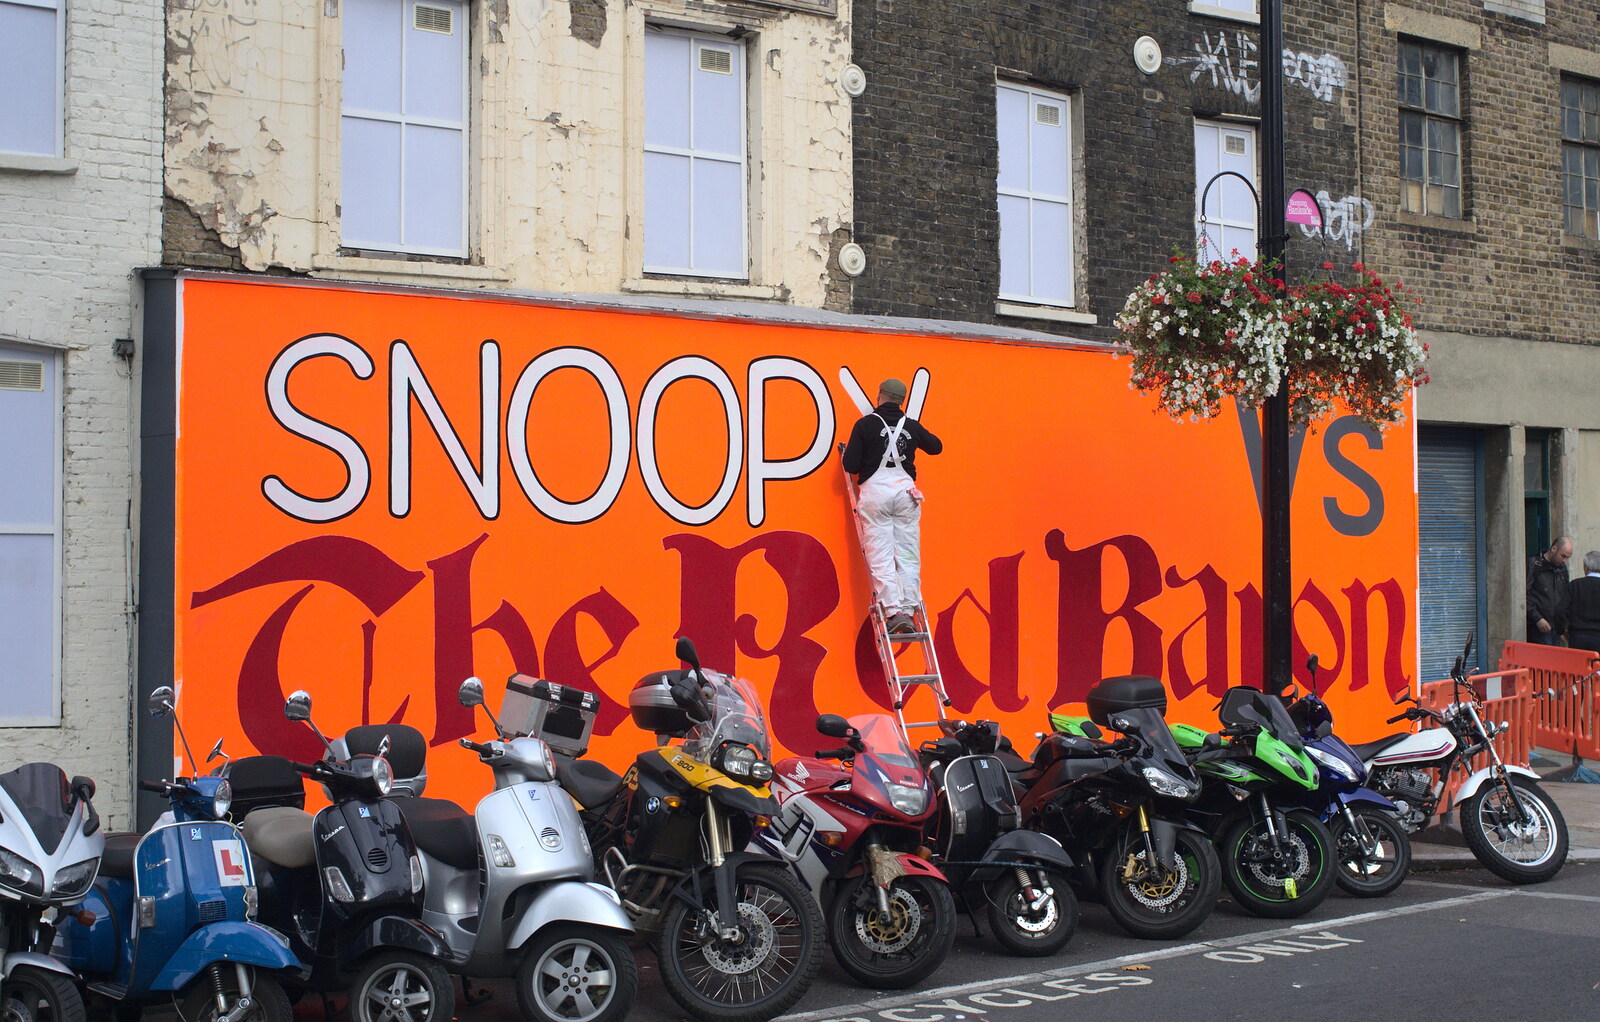 The signwriter paints an outline around 'Snoopy' from A TouchType Office Fire Drill, Southwark Bridge Road, London - 6th October 2012